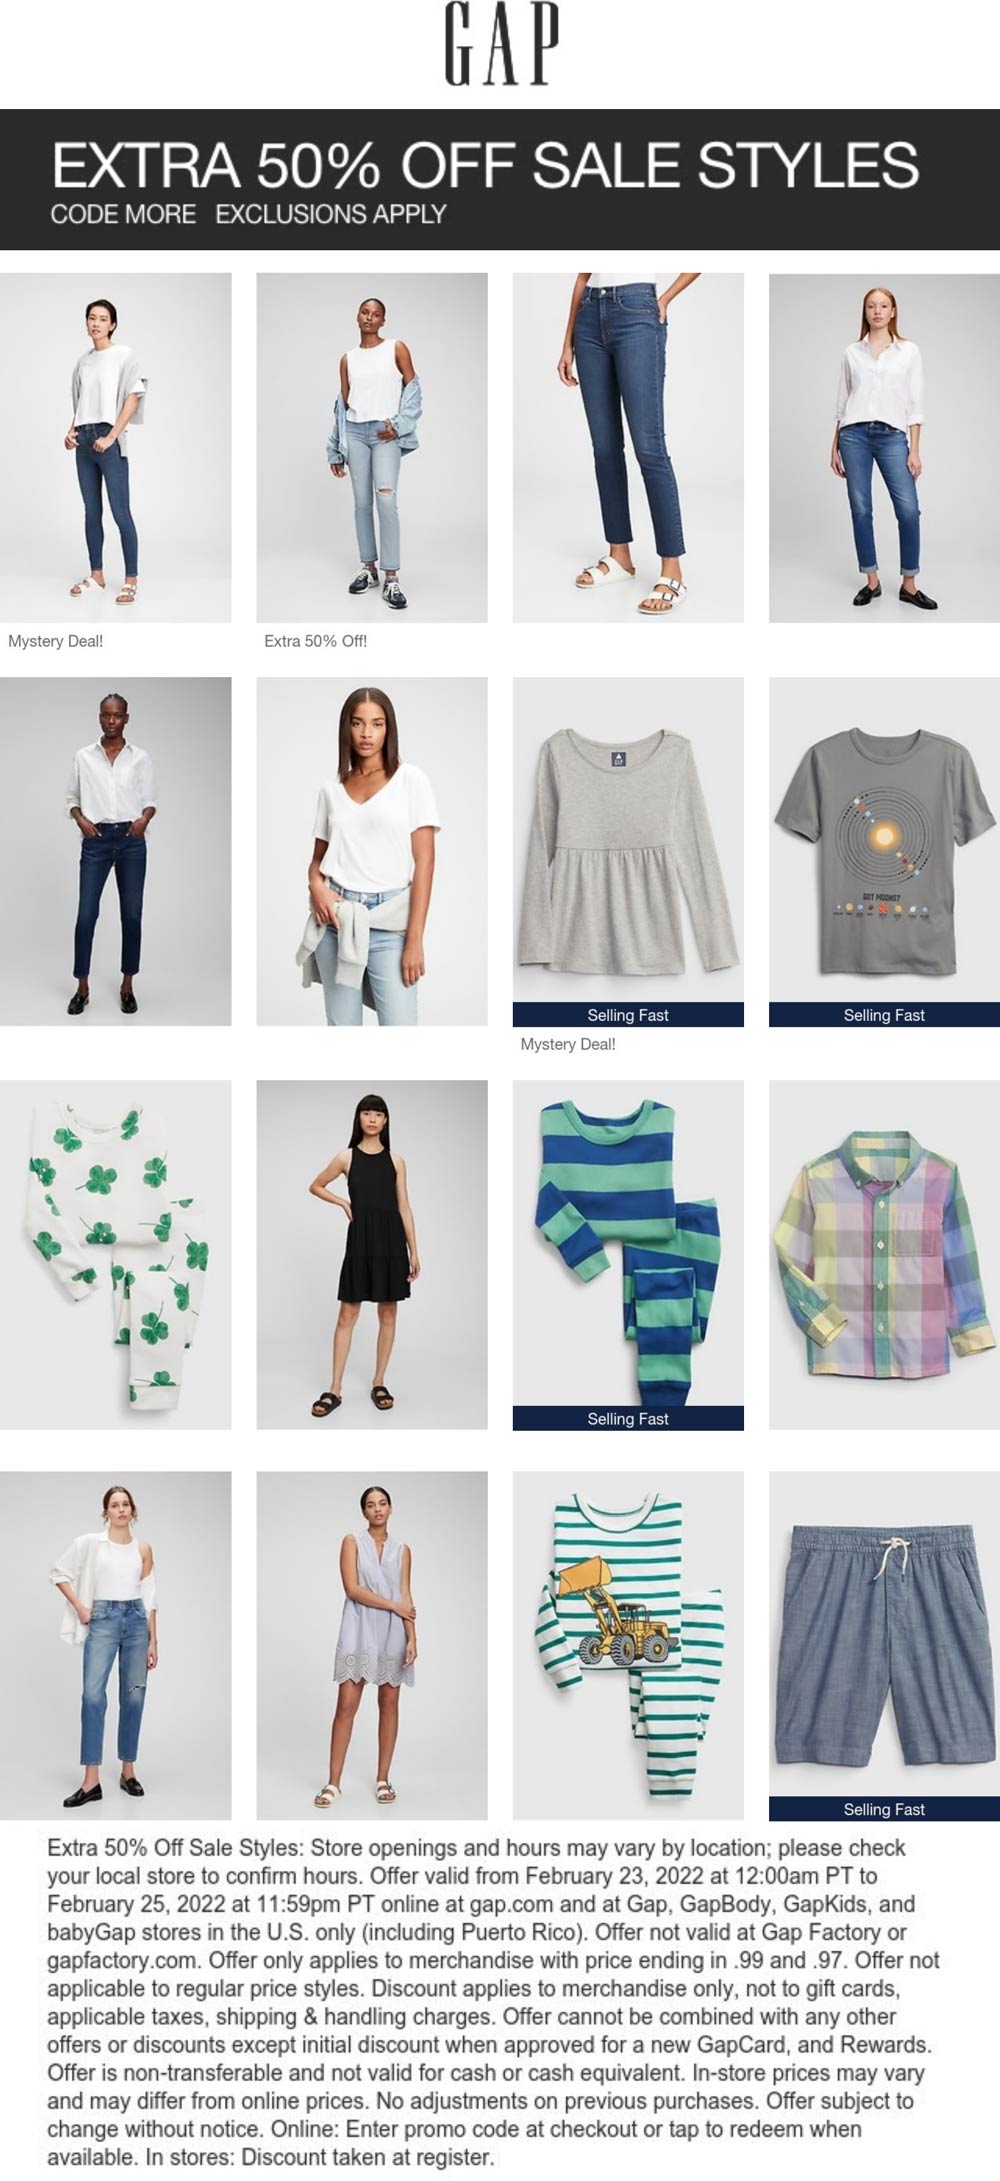 Gap stores Coupon  Extra 50% off sale styles at Gap, or online via promo code MORE #gap 